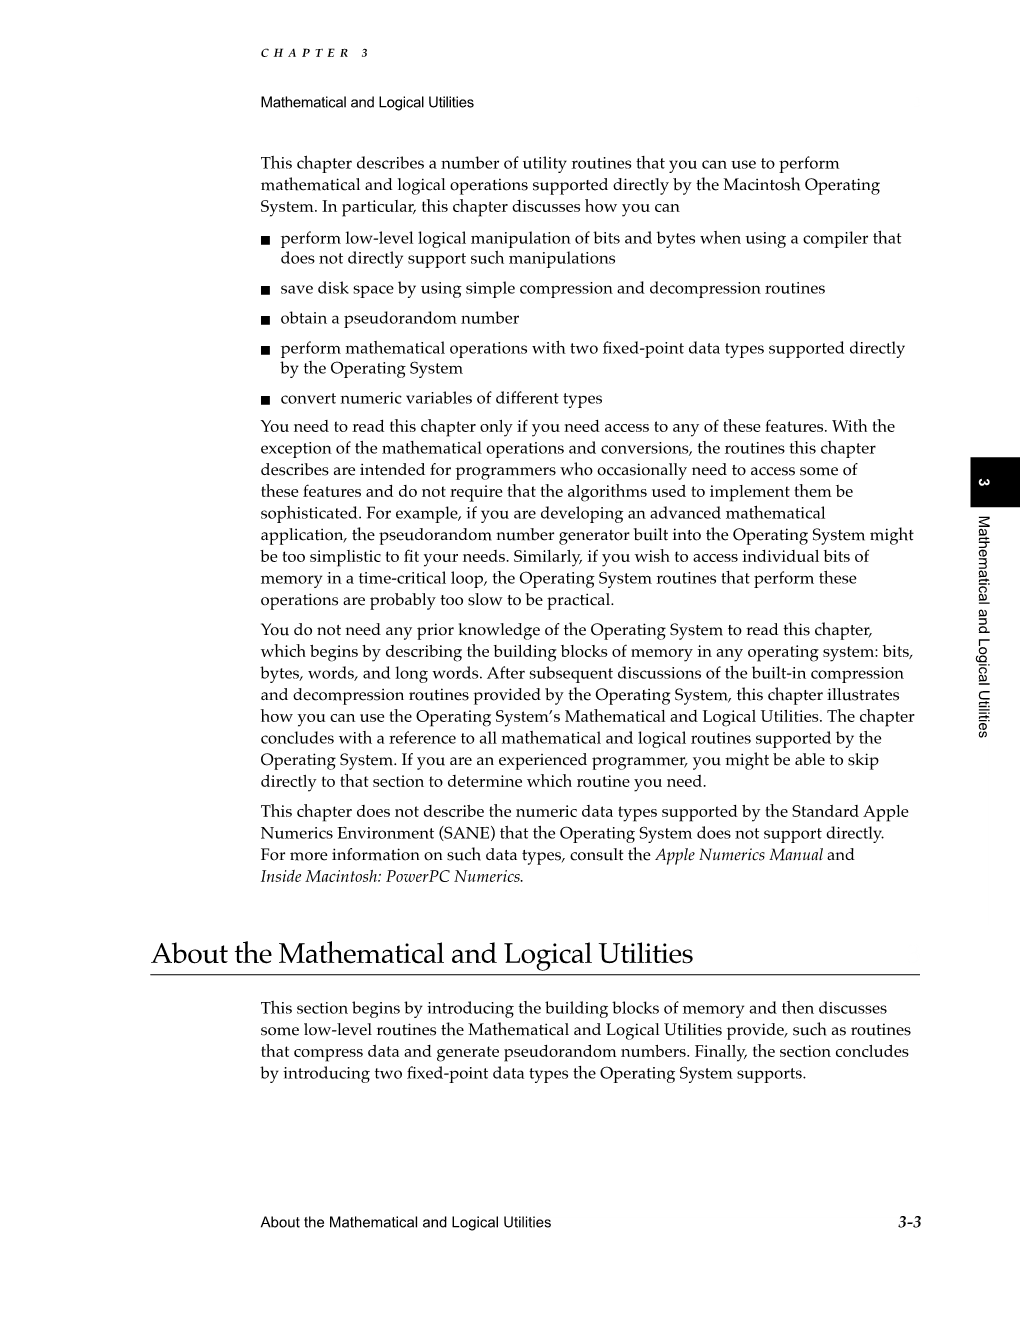 Mathematical and Logical Utilities 3